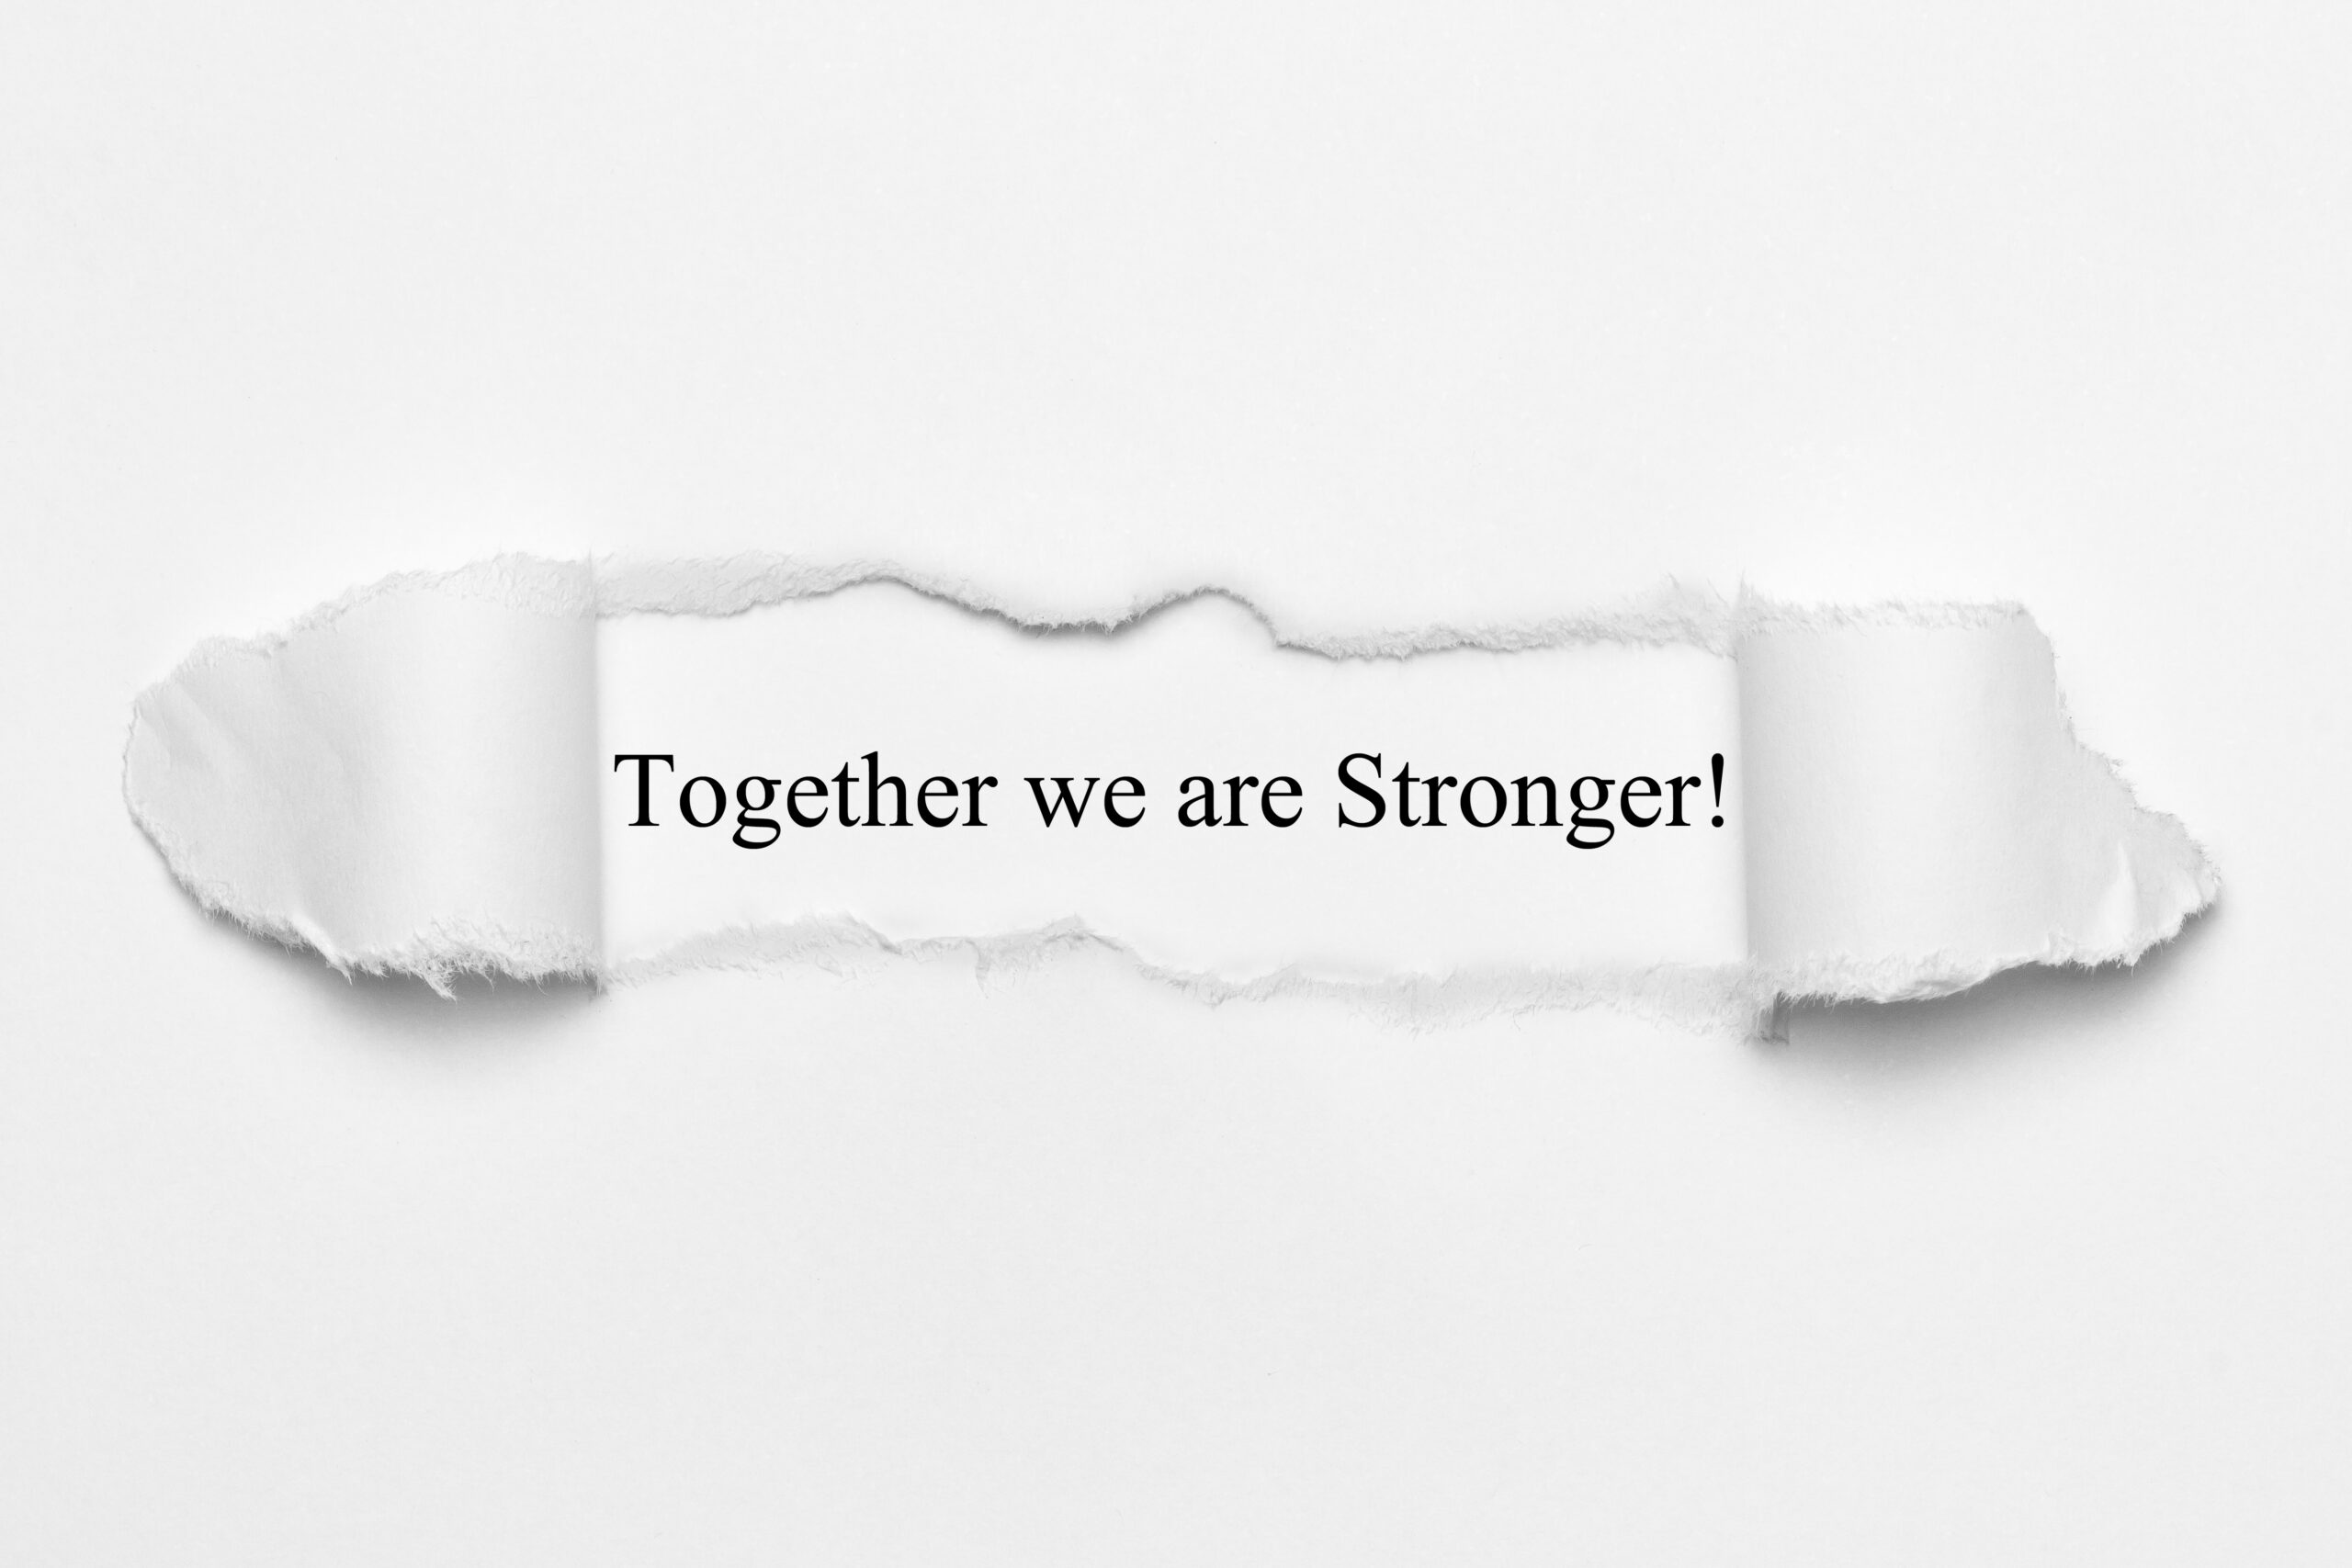 White paper, torn open - together we are stronger